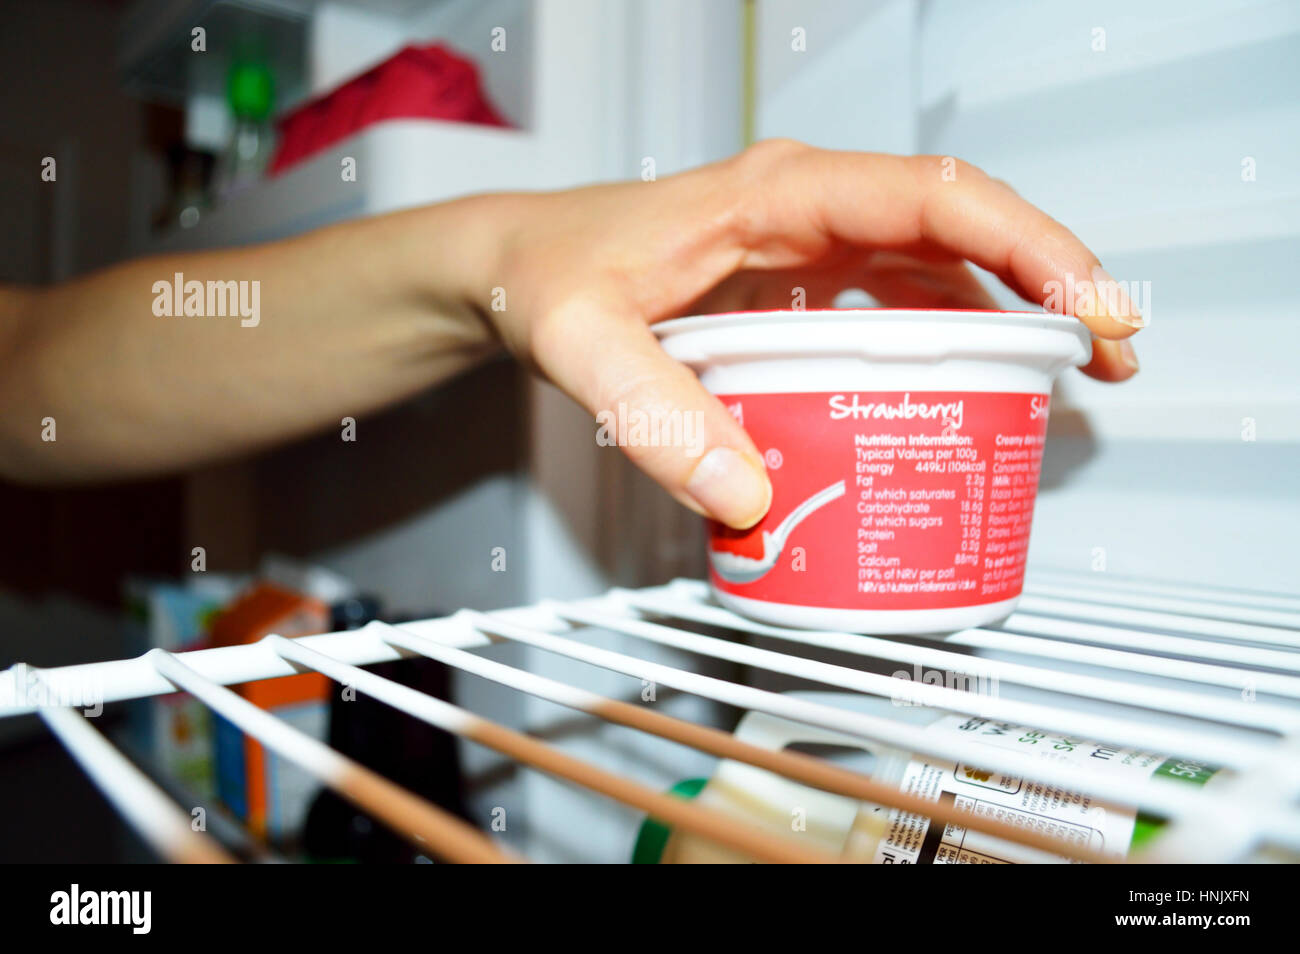 Hand of a woman reaching for a dessert in a fridge. Stock Photo